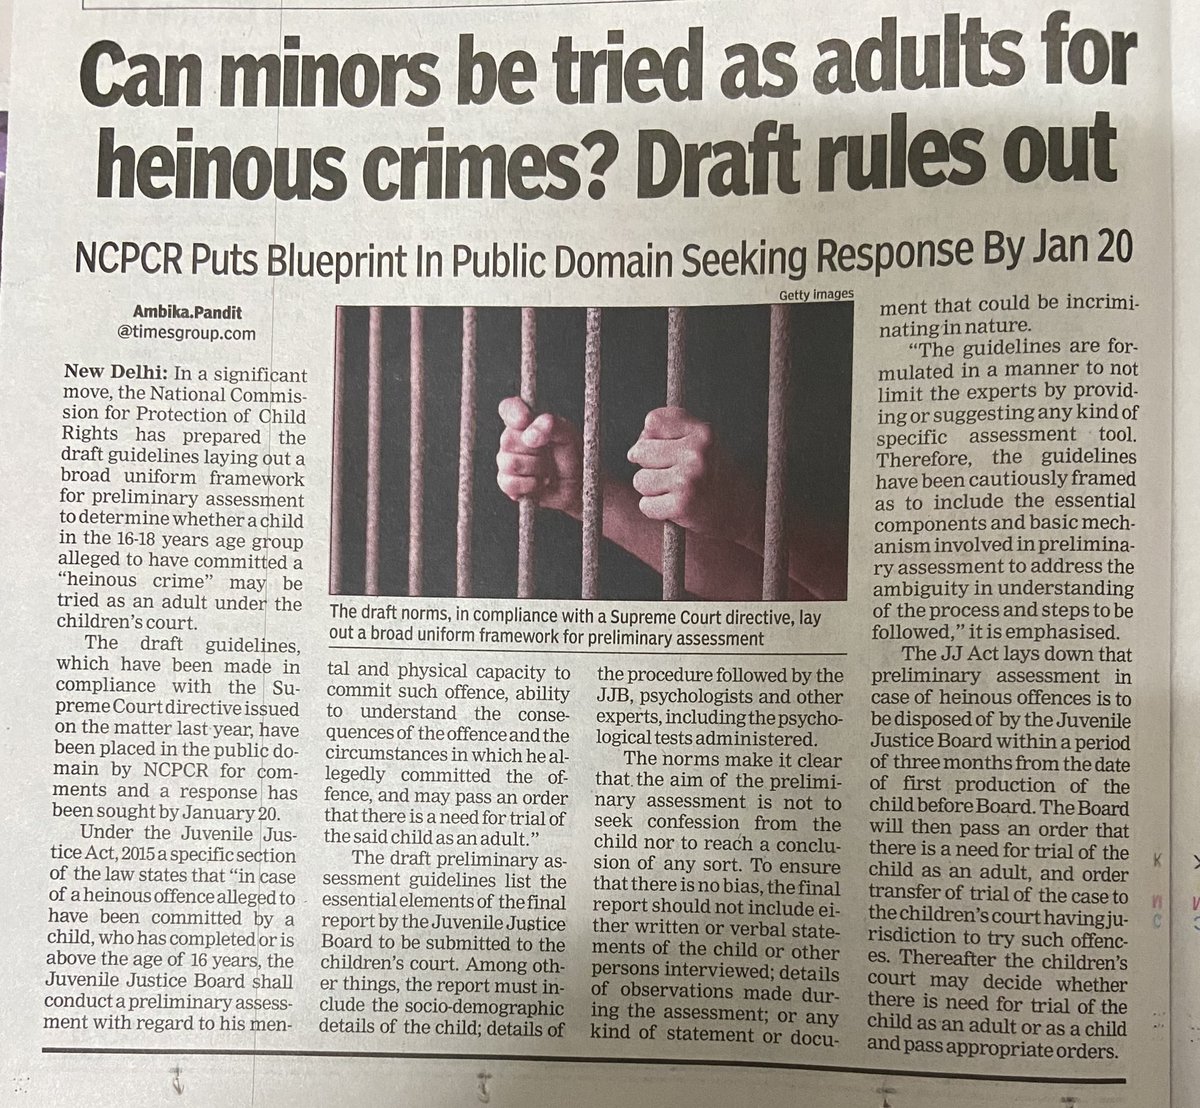 #Speakup. Please be heard. It's time. All minors who took an innocent life, with planning and conspiracy need to be treated as adults. Heinous/serious Crime has no Age or Gender. #LegalReform #VictimsUnited @NCPCR_ @India_NHRC @LiveLawIndia @PTI_News @ANI